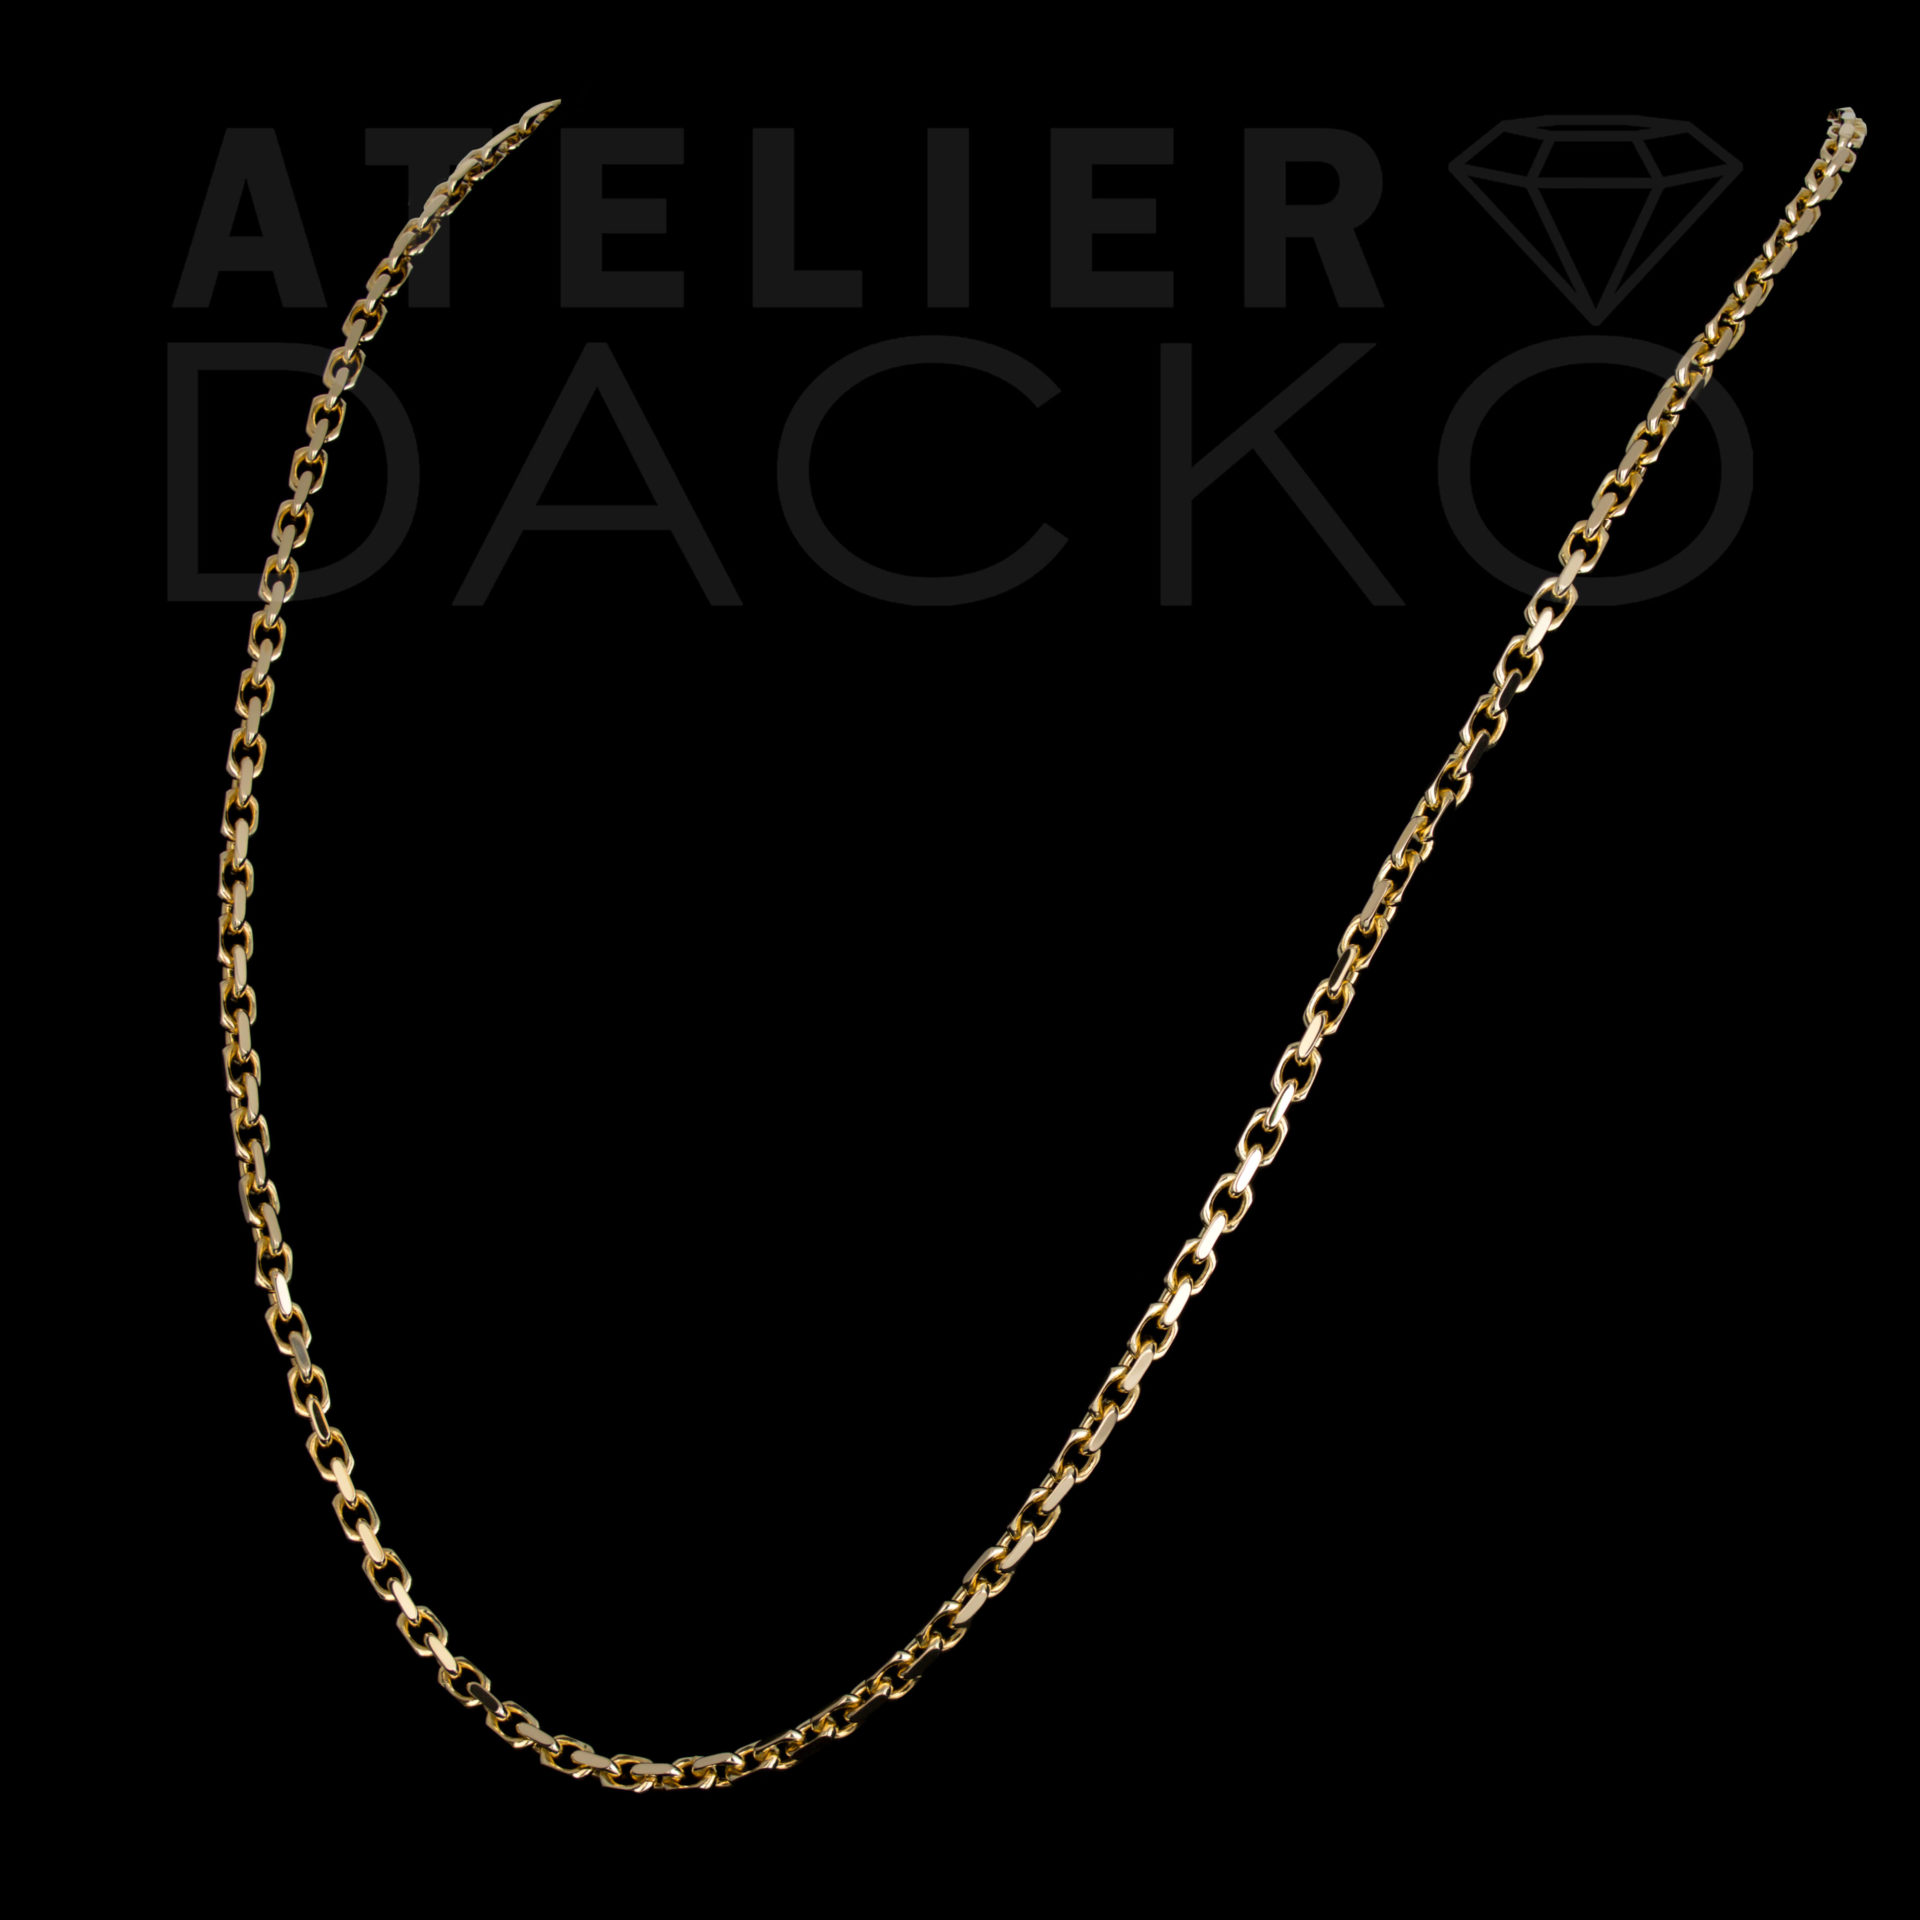 AD032 - 3 MM HermesOdin Link Chain in Yellow Gold - 2